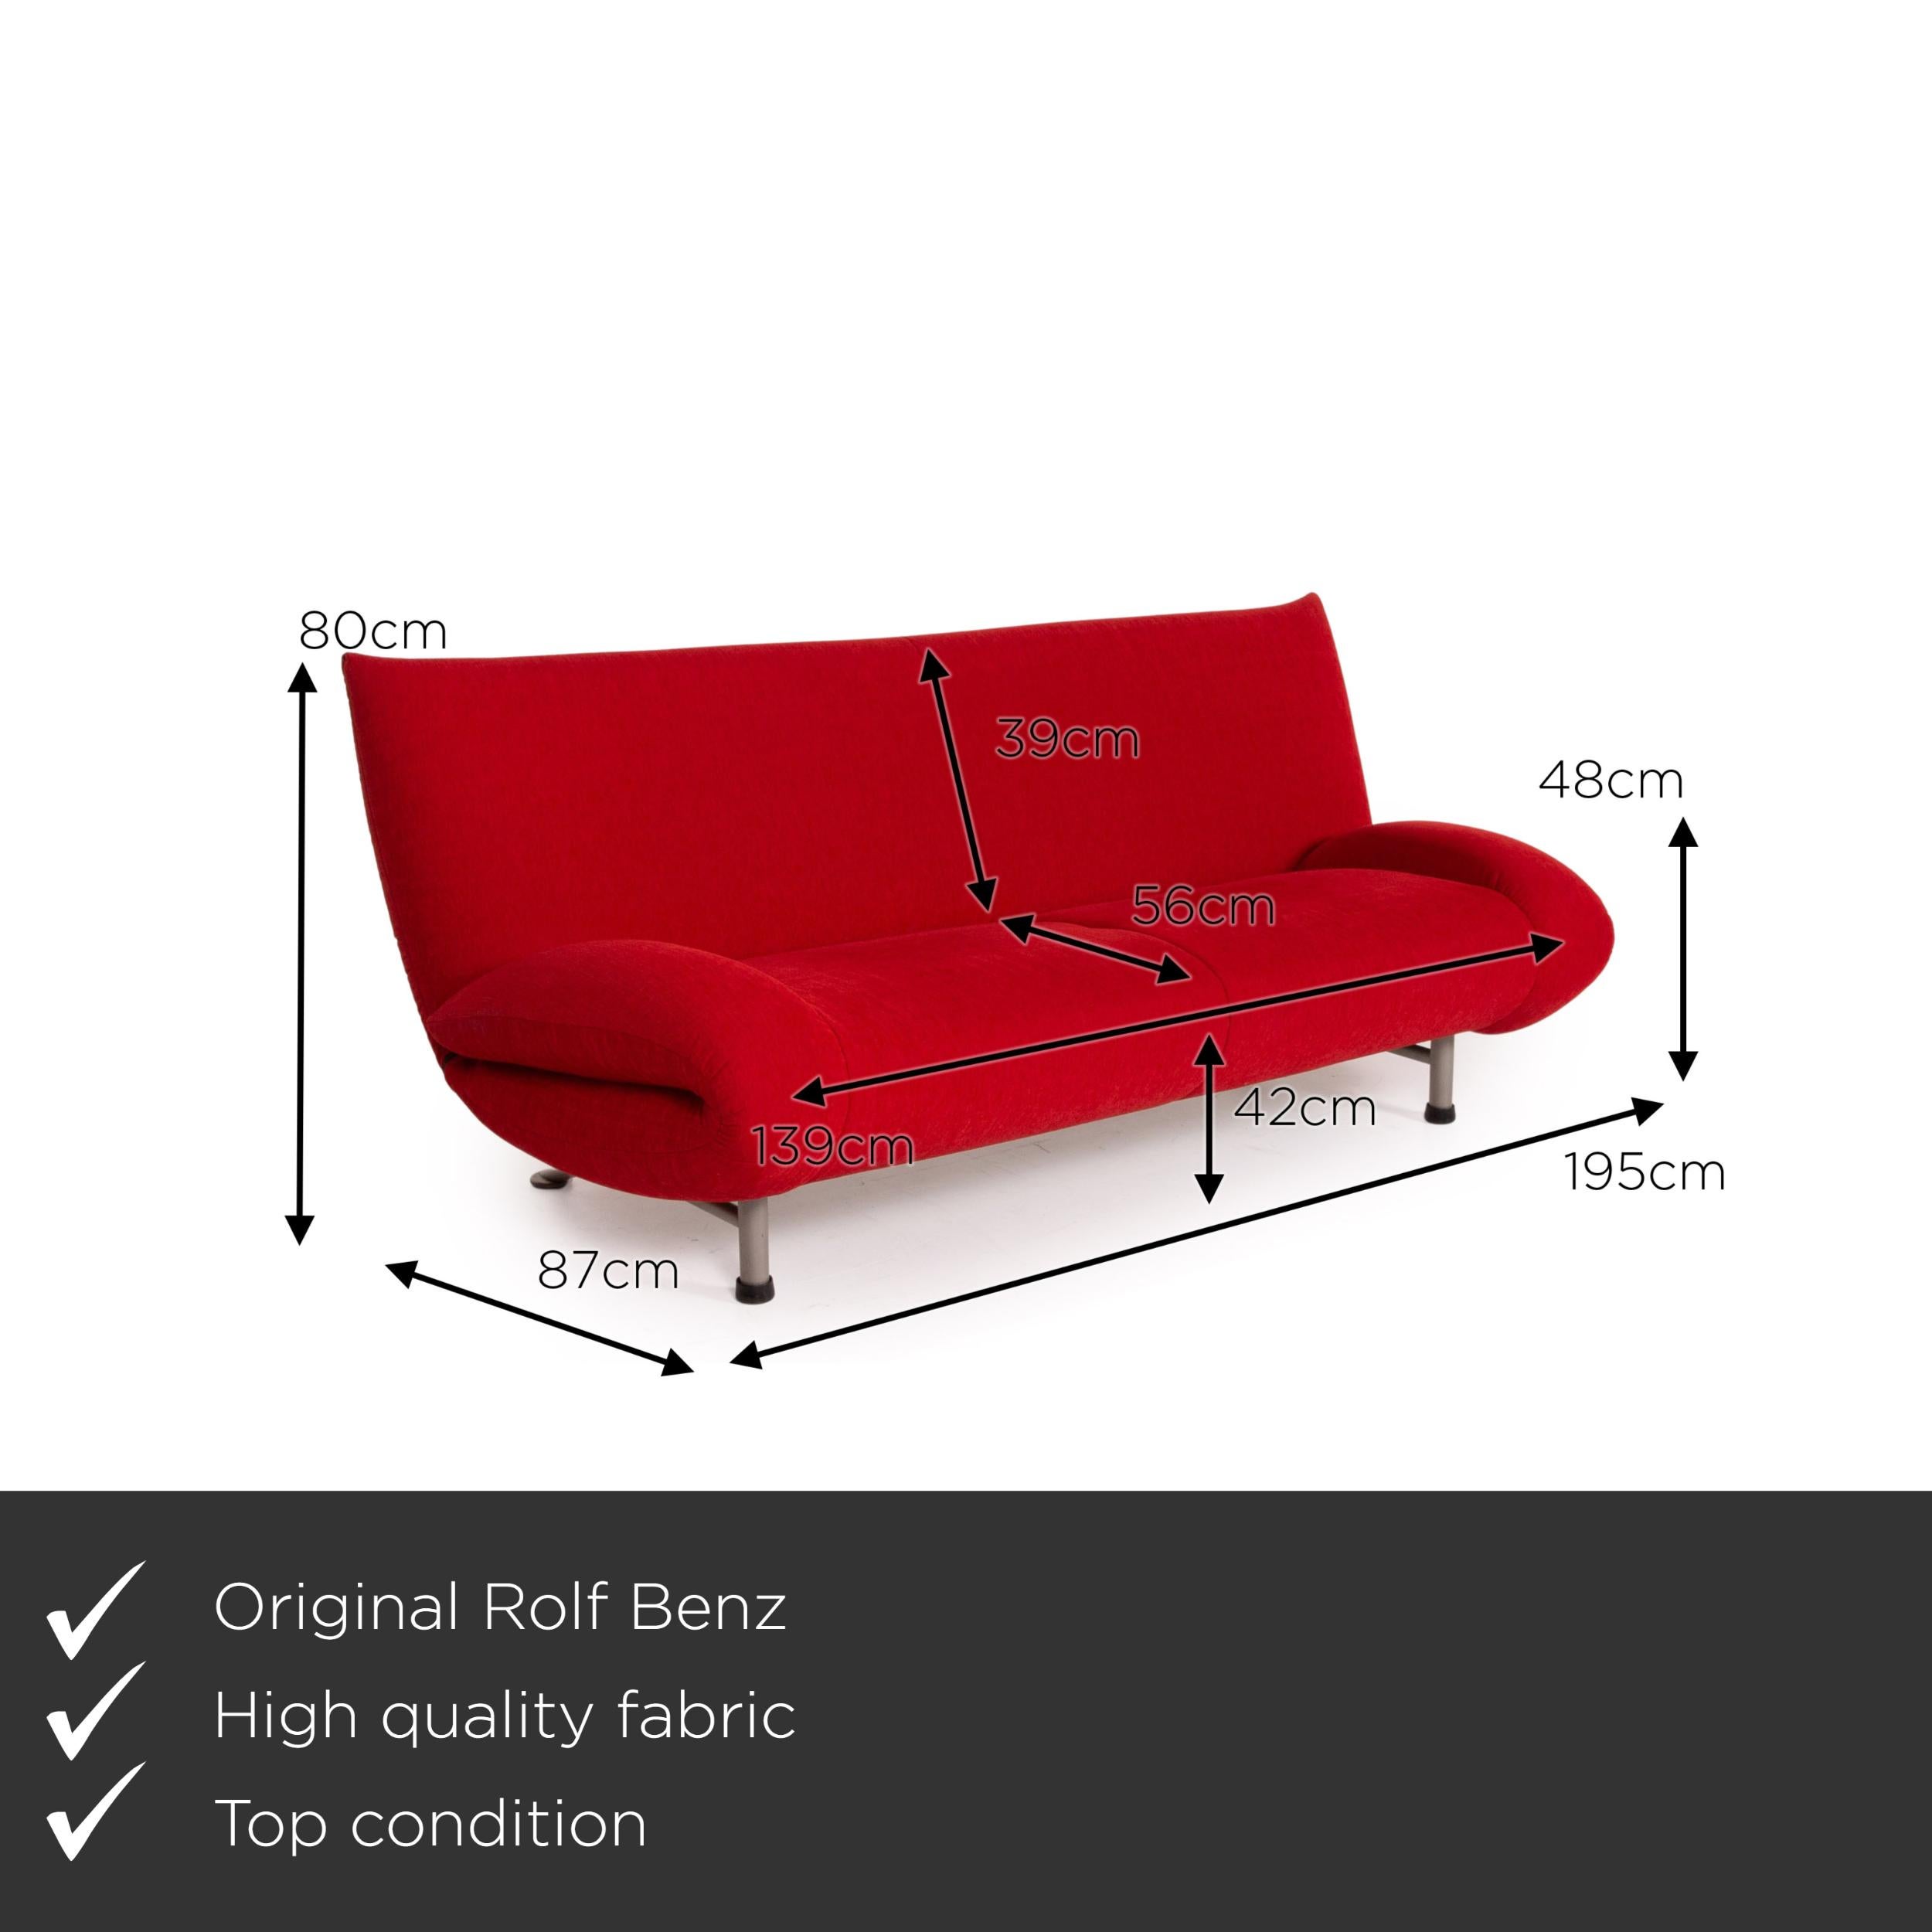 We present to you a Rolf Benz fabric sofa red three-seater couch.

 

 Product measurements in centimeters:
 

Depth 87
Width 195
Height 80
Seat height 42
Rest height 48
Seat depth 56
Seat width 139
Back height 39.